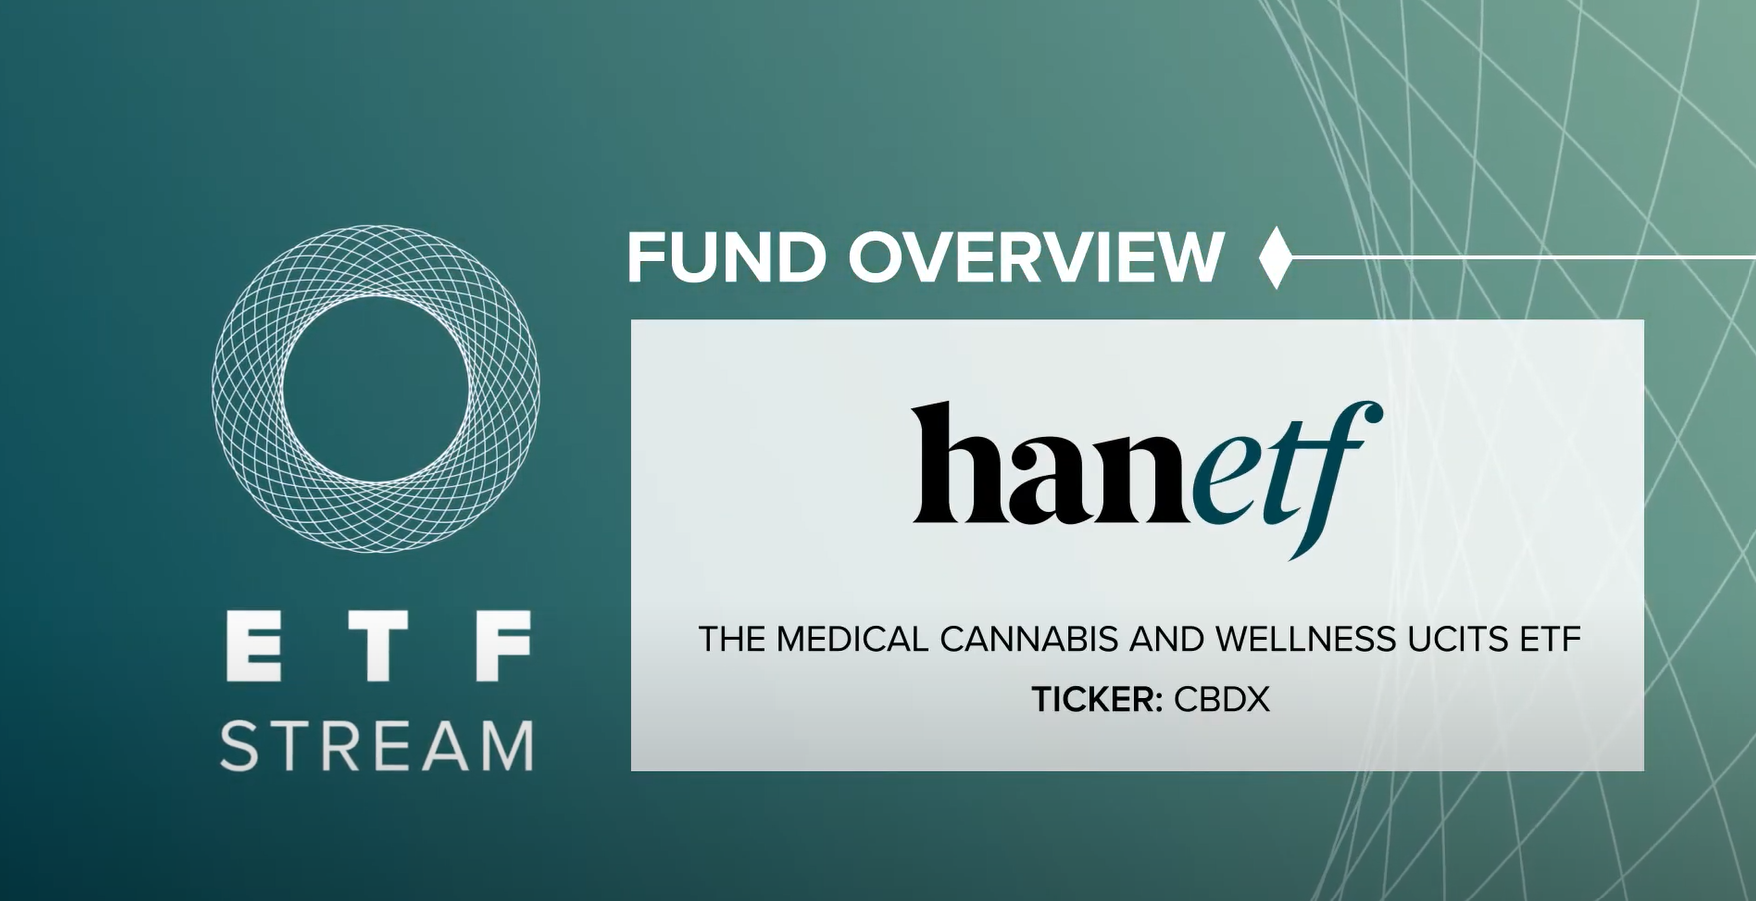 Fund Overview Video CBDX Medical Cannabis and Wellness UCITS ETF from HANetf